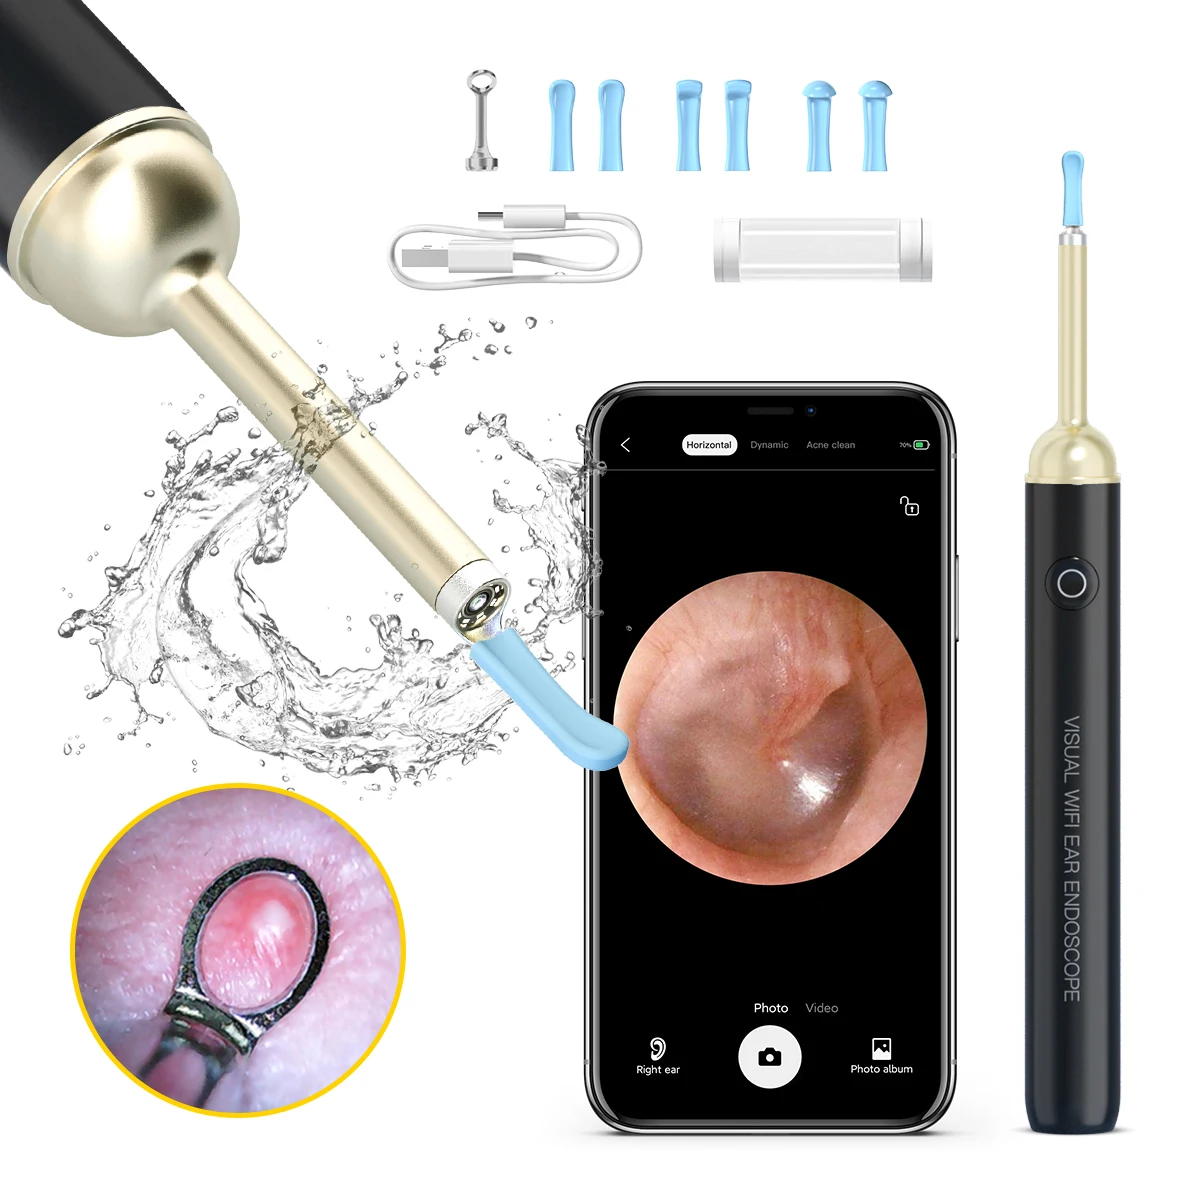 

Digital 1080P Visual Ear Wax Cleaning Kit Inspection Endoscope Scope Camera Wireless Ear Video Otoscope With 6 Adjustable